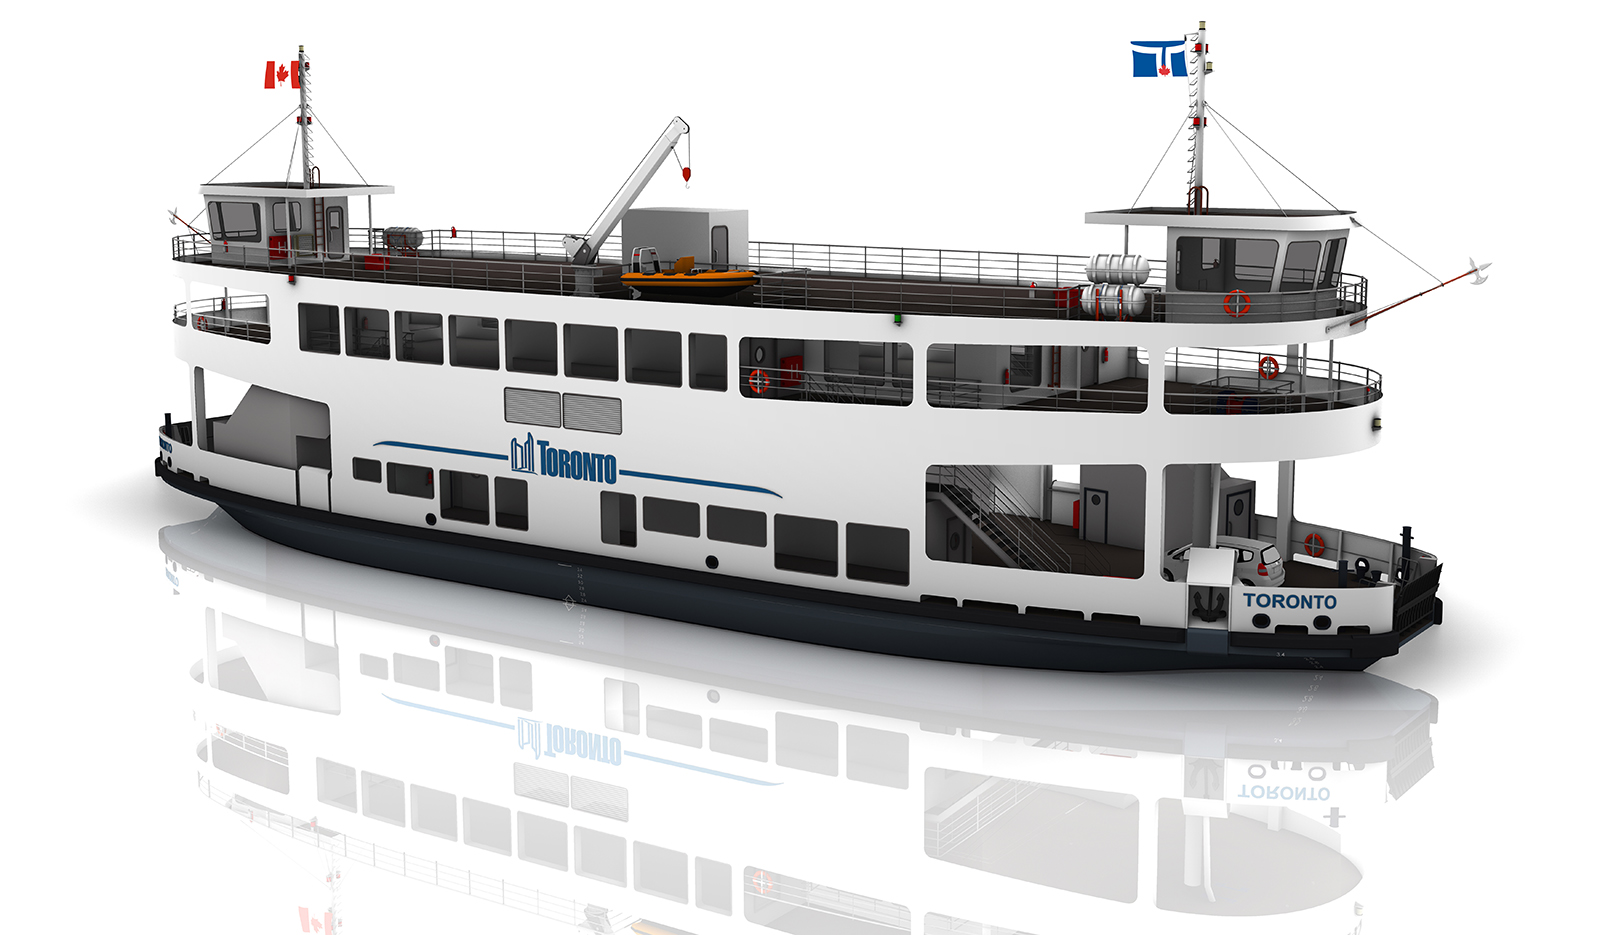 A rendering of the passenger/vehicle ferry design (called ROPAX) while on the water with the Toronto city skyline in the background. The ferry is white with two mostly enclosed levels with eight windows on the top level.